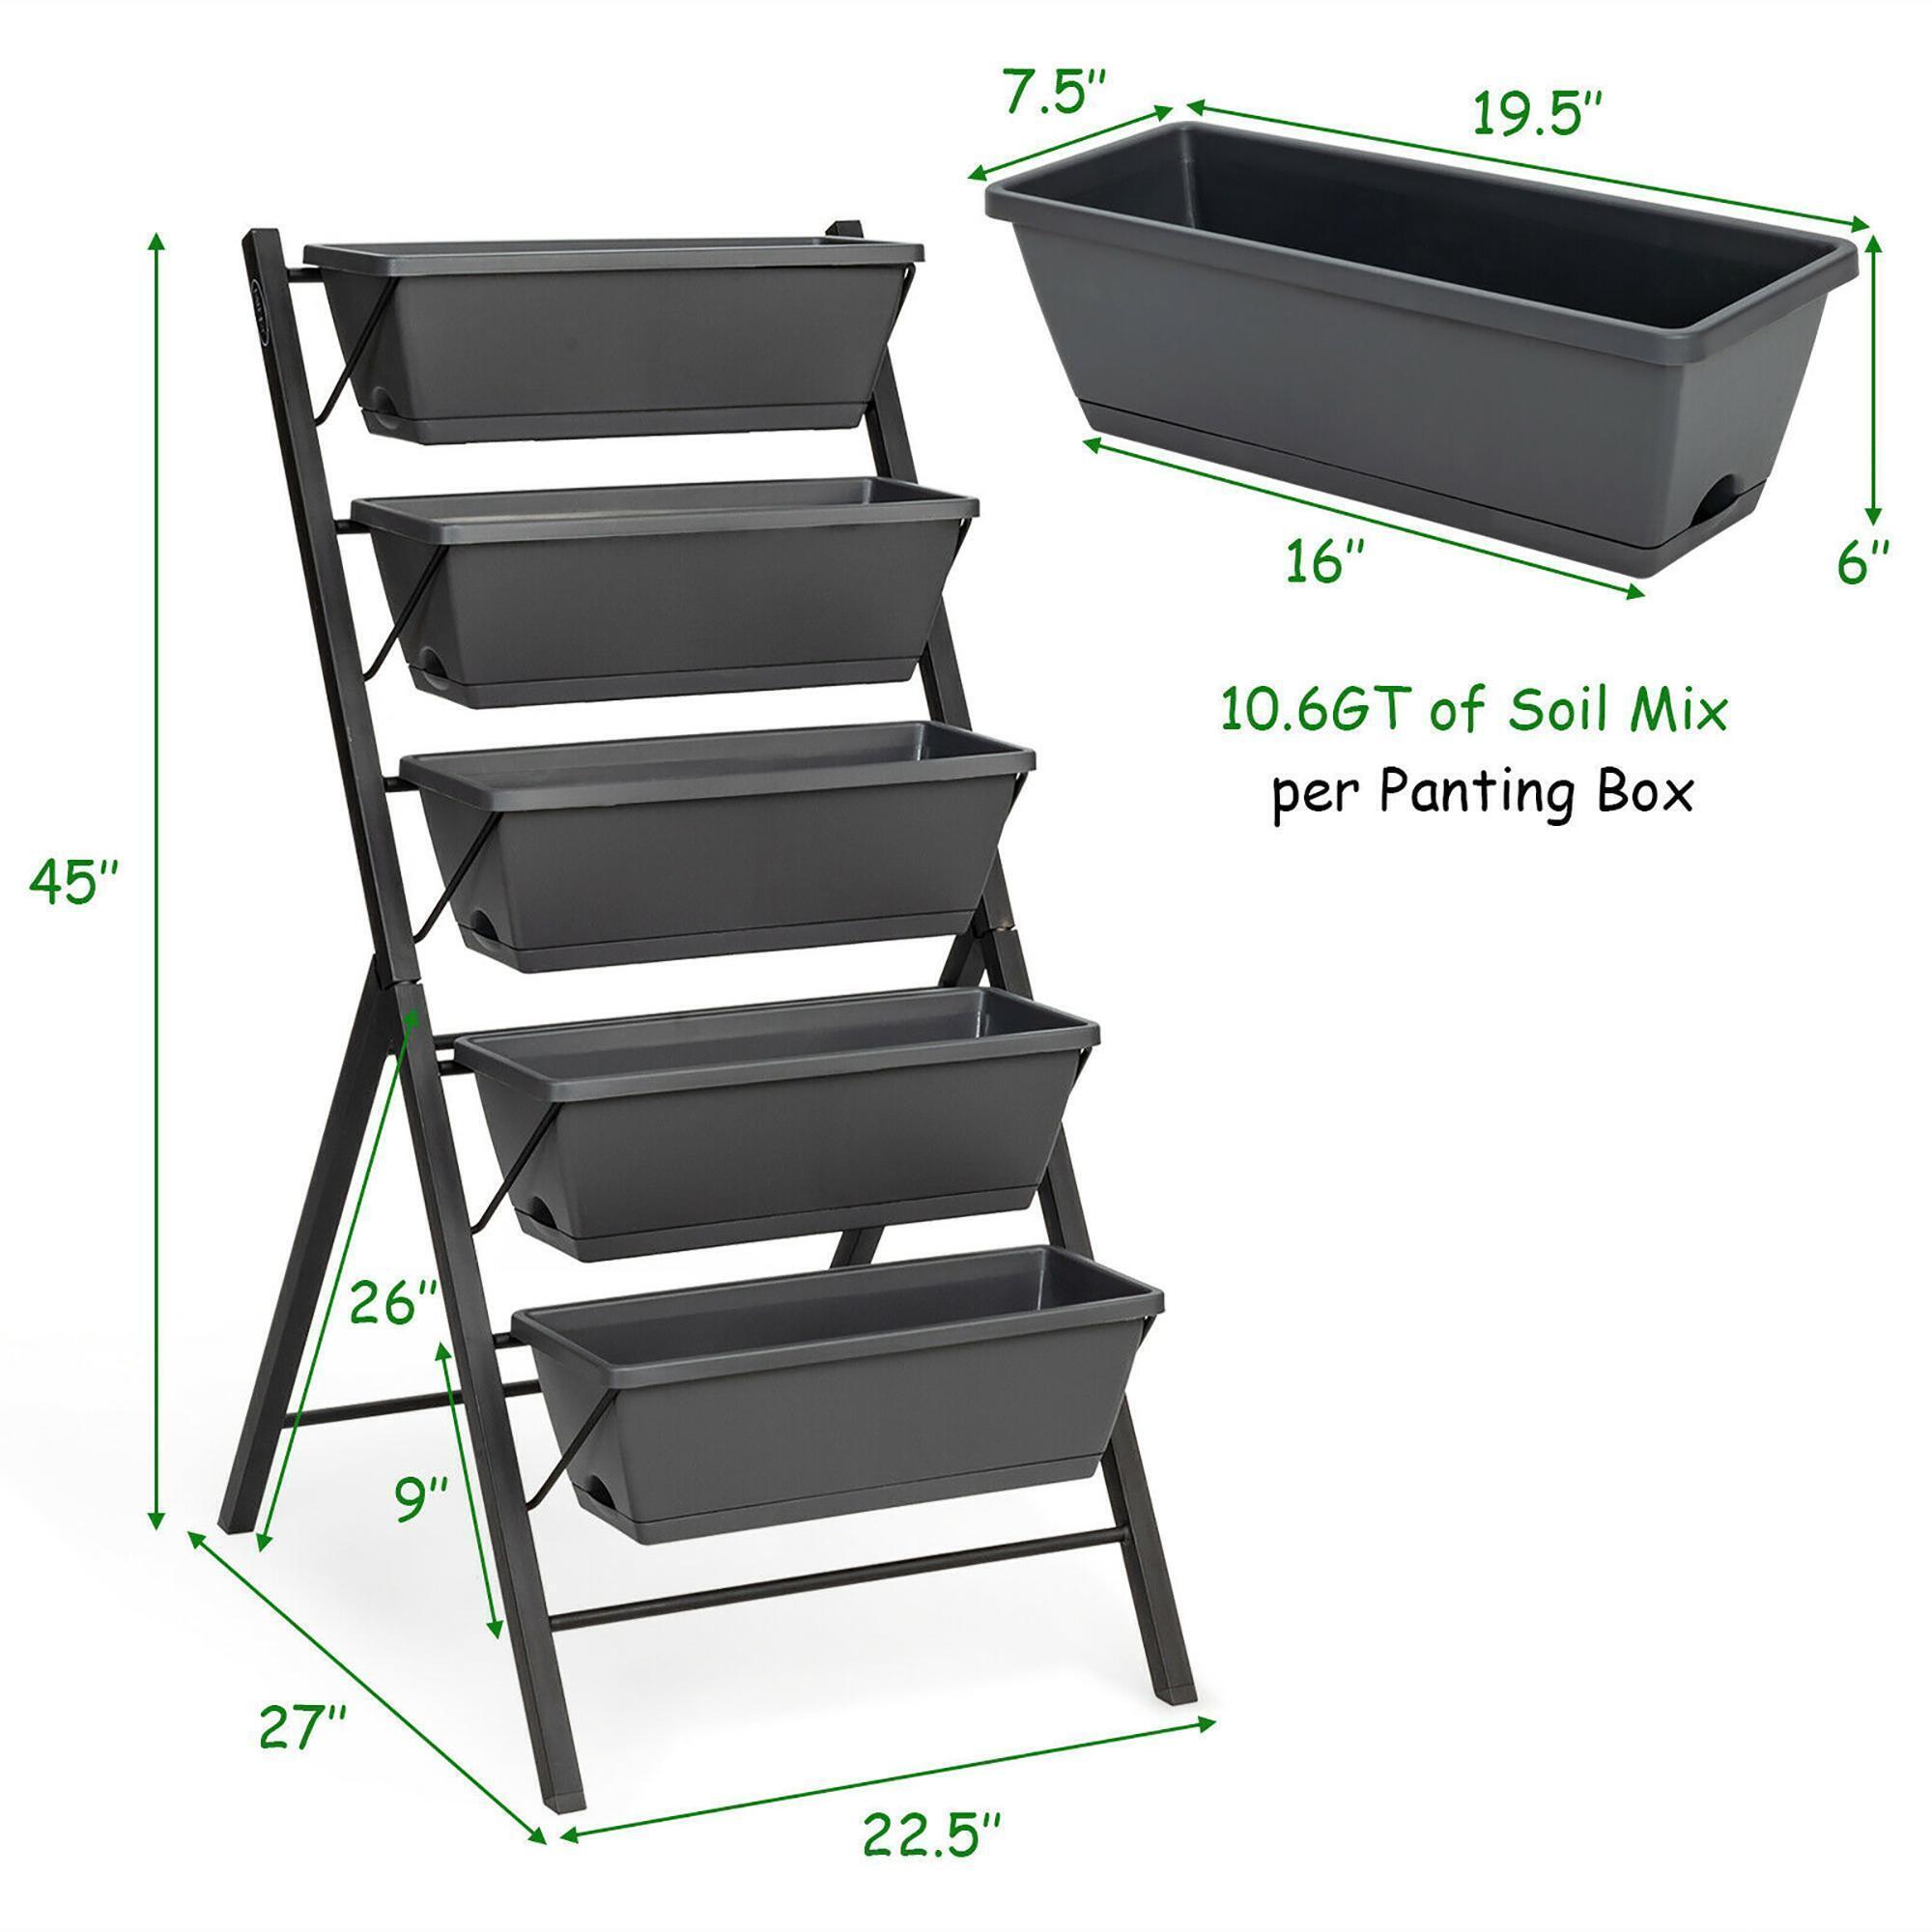 Costway 4 FT Vertical Raised Garden Bed 5-Tier Planter Box for Patio Balcony Flower Herb alternate image